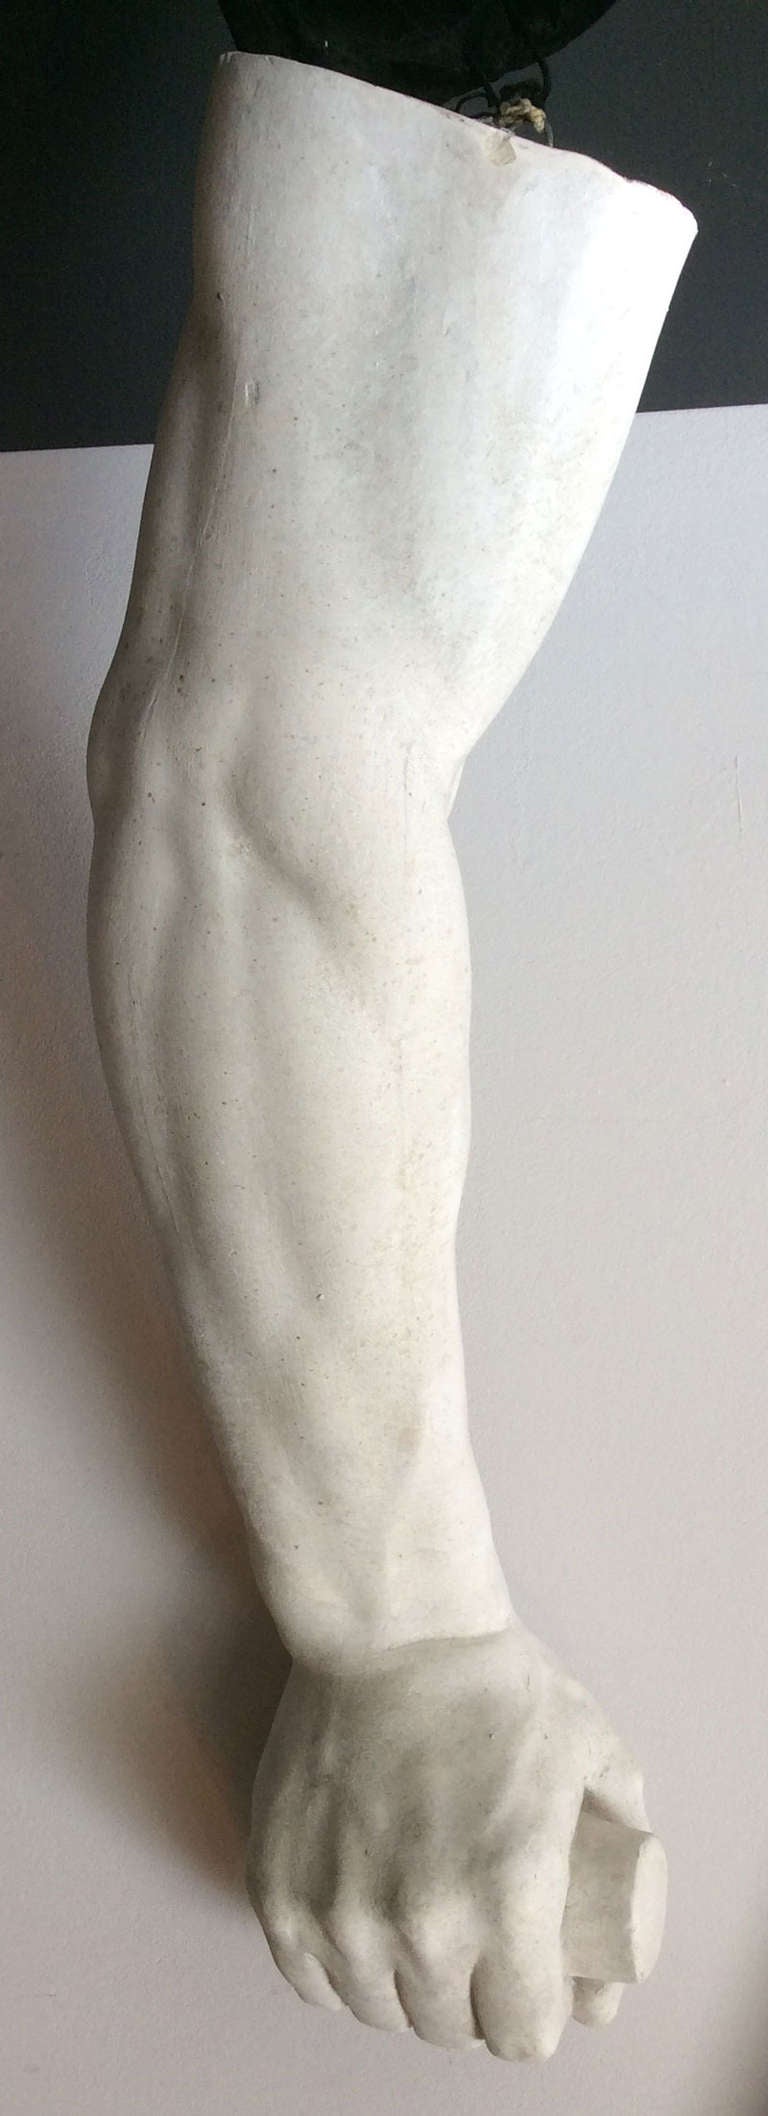 Beautiful and rare collection of plaster casts, models from a school of fine arts, late nineteenth century, France.

Arm with hand in plaster.